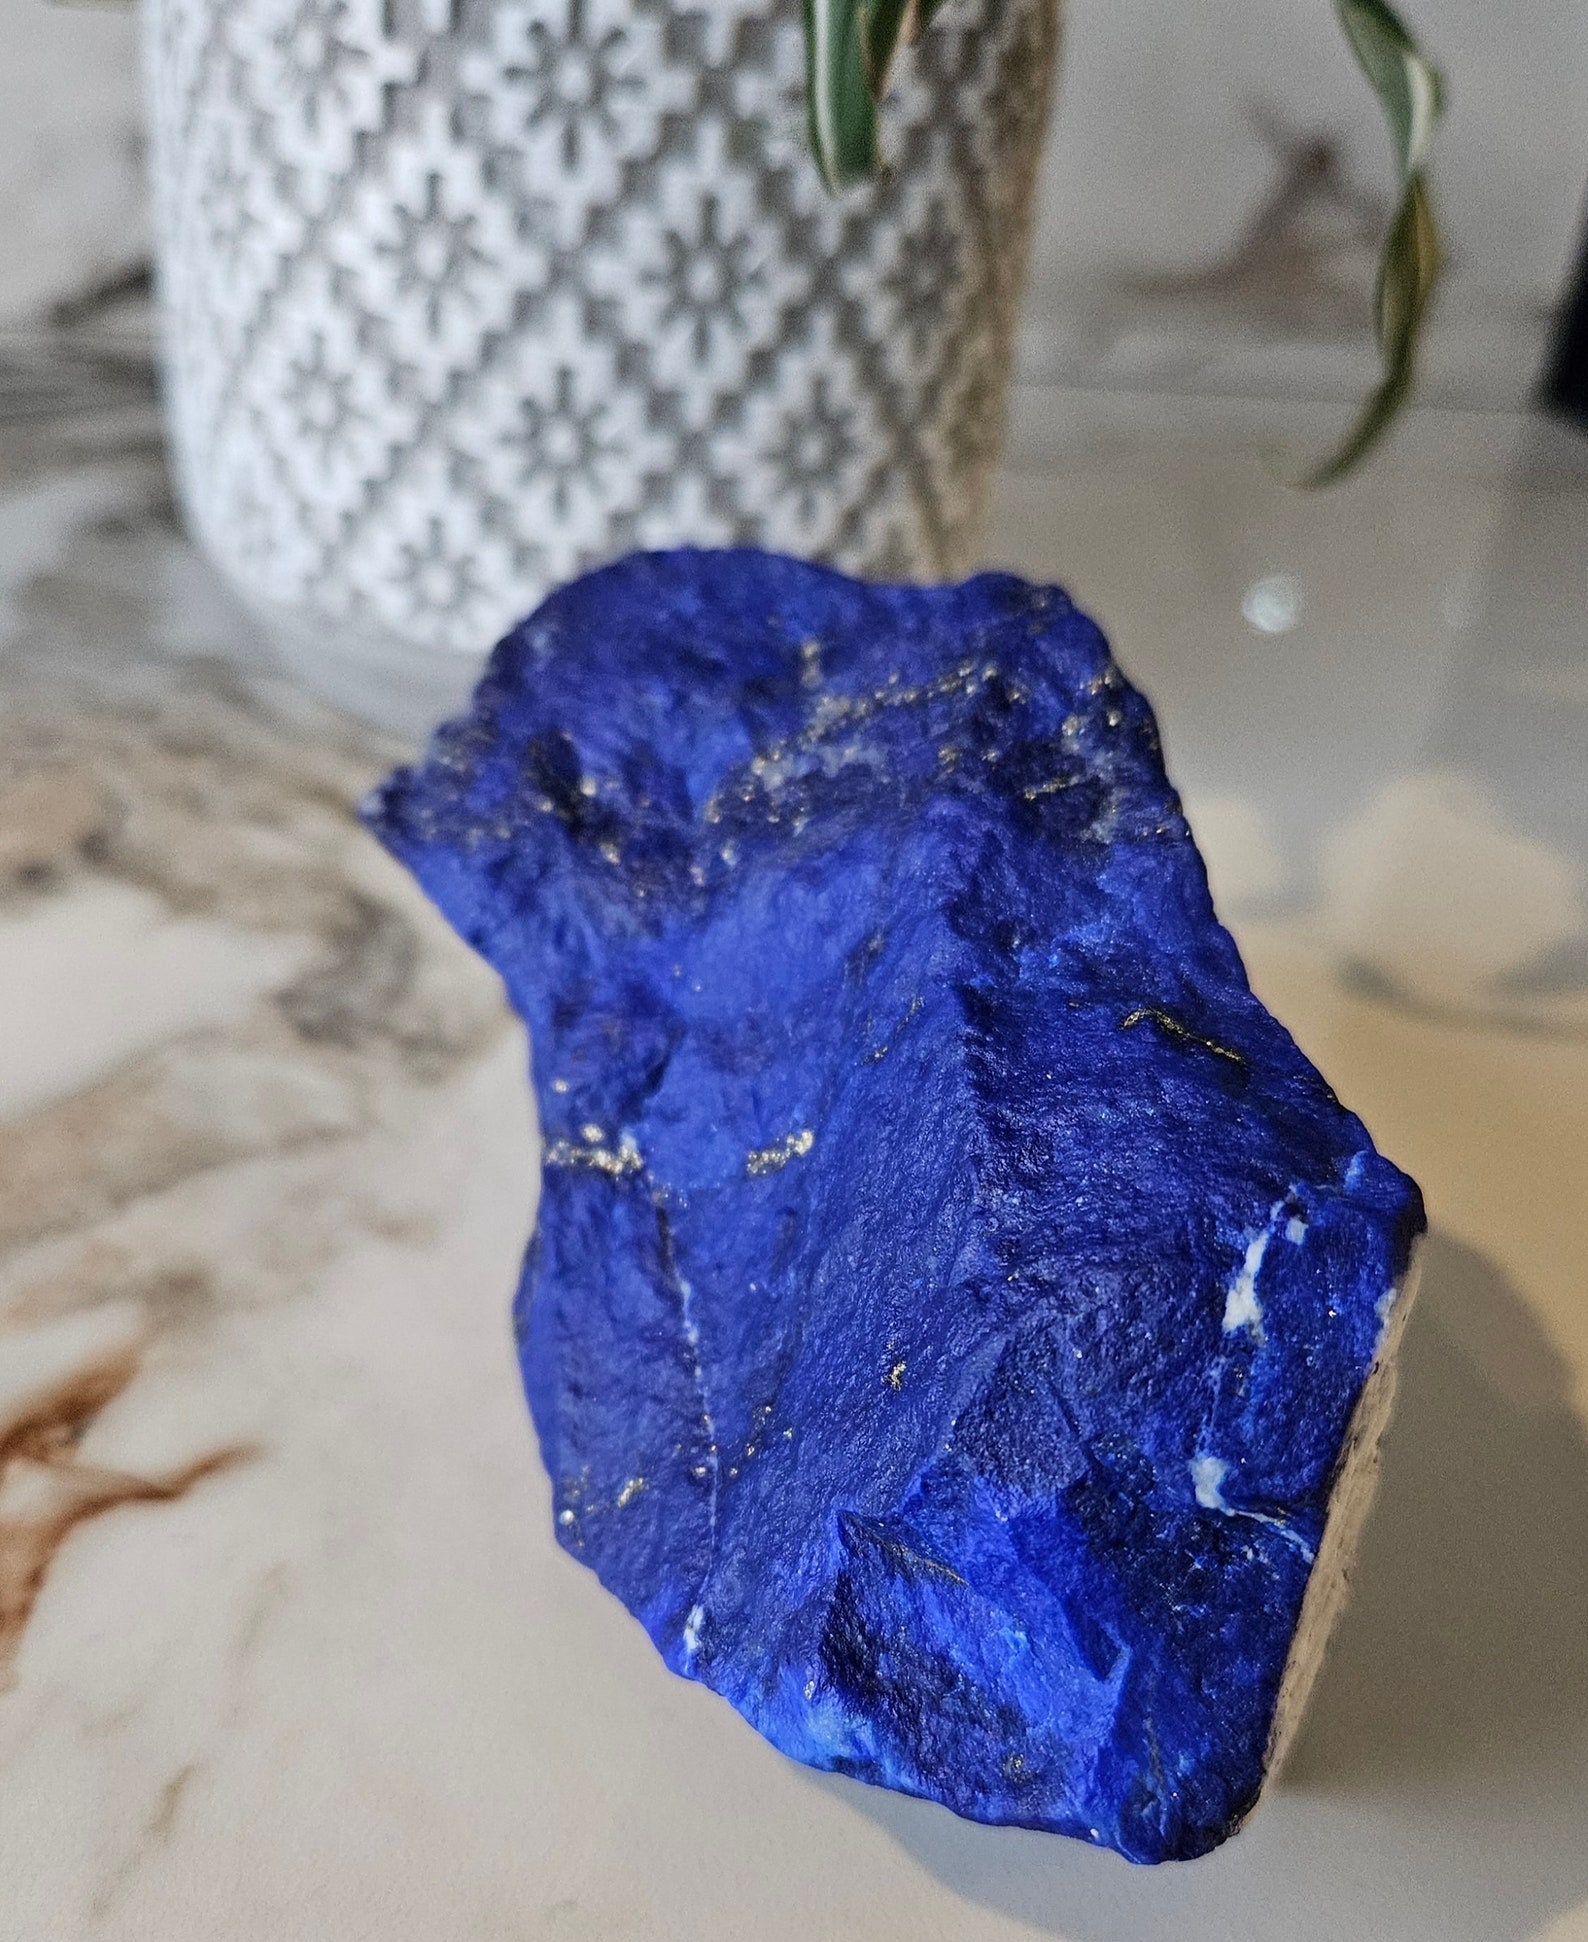 2.79 Lb Mine 4 Raw Lapis Lazuli Stone from Afghanistan, Very High Quality Natural Stone with Authentic Gemstone Crystal, Madani Lapis